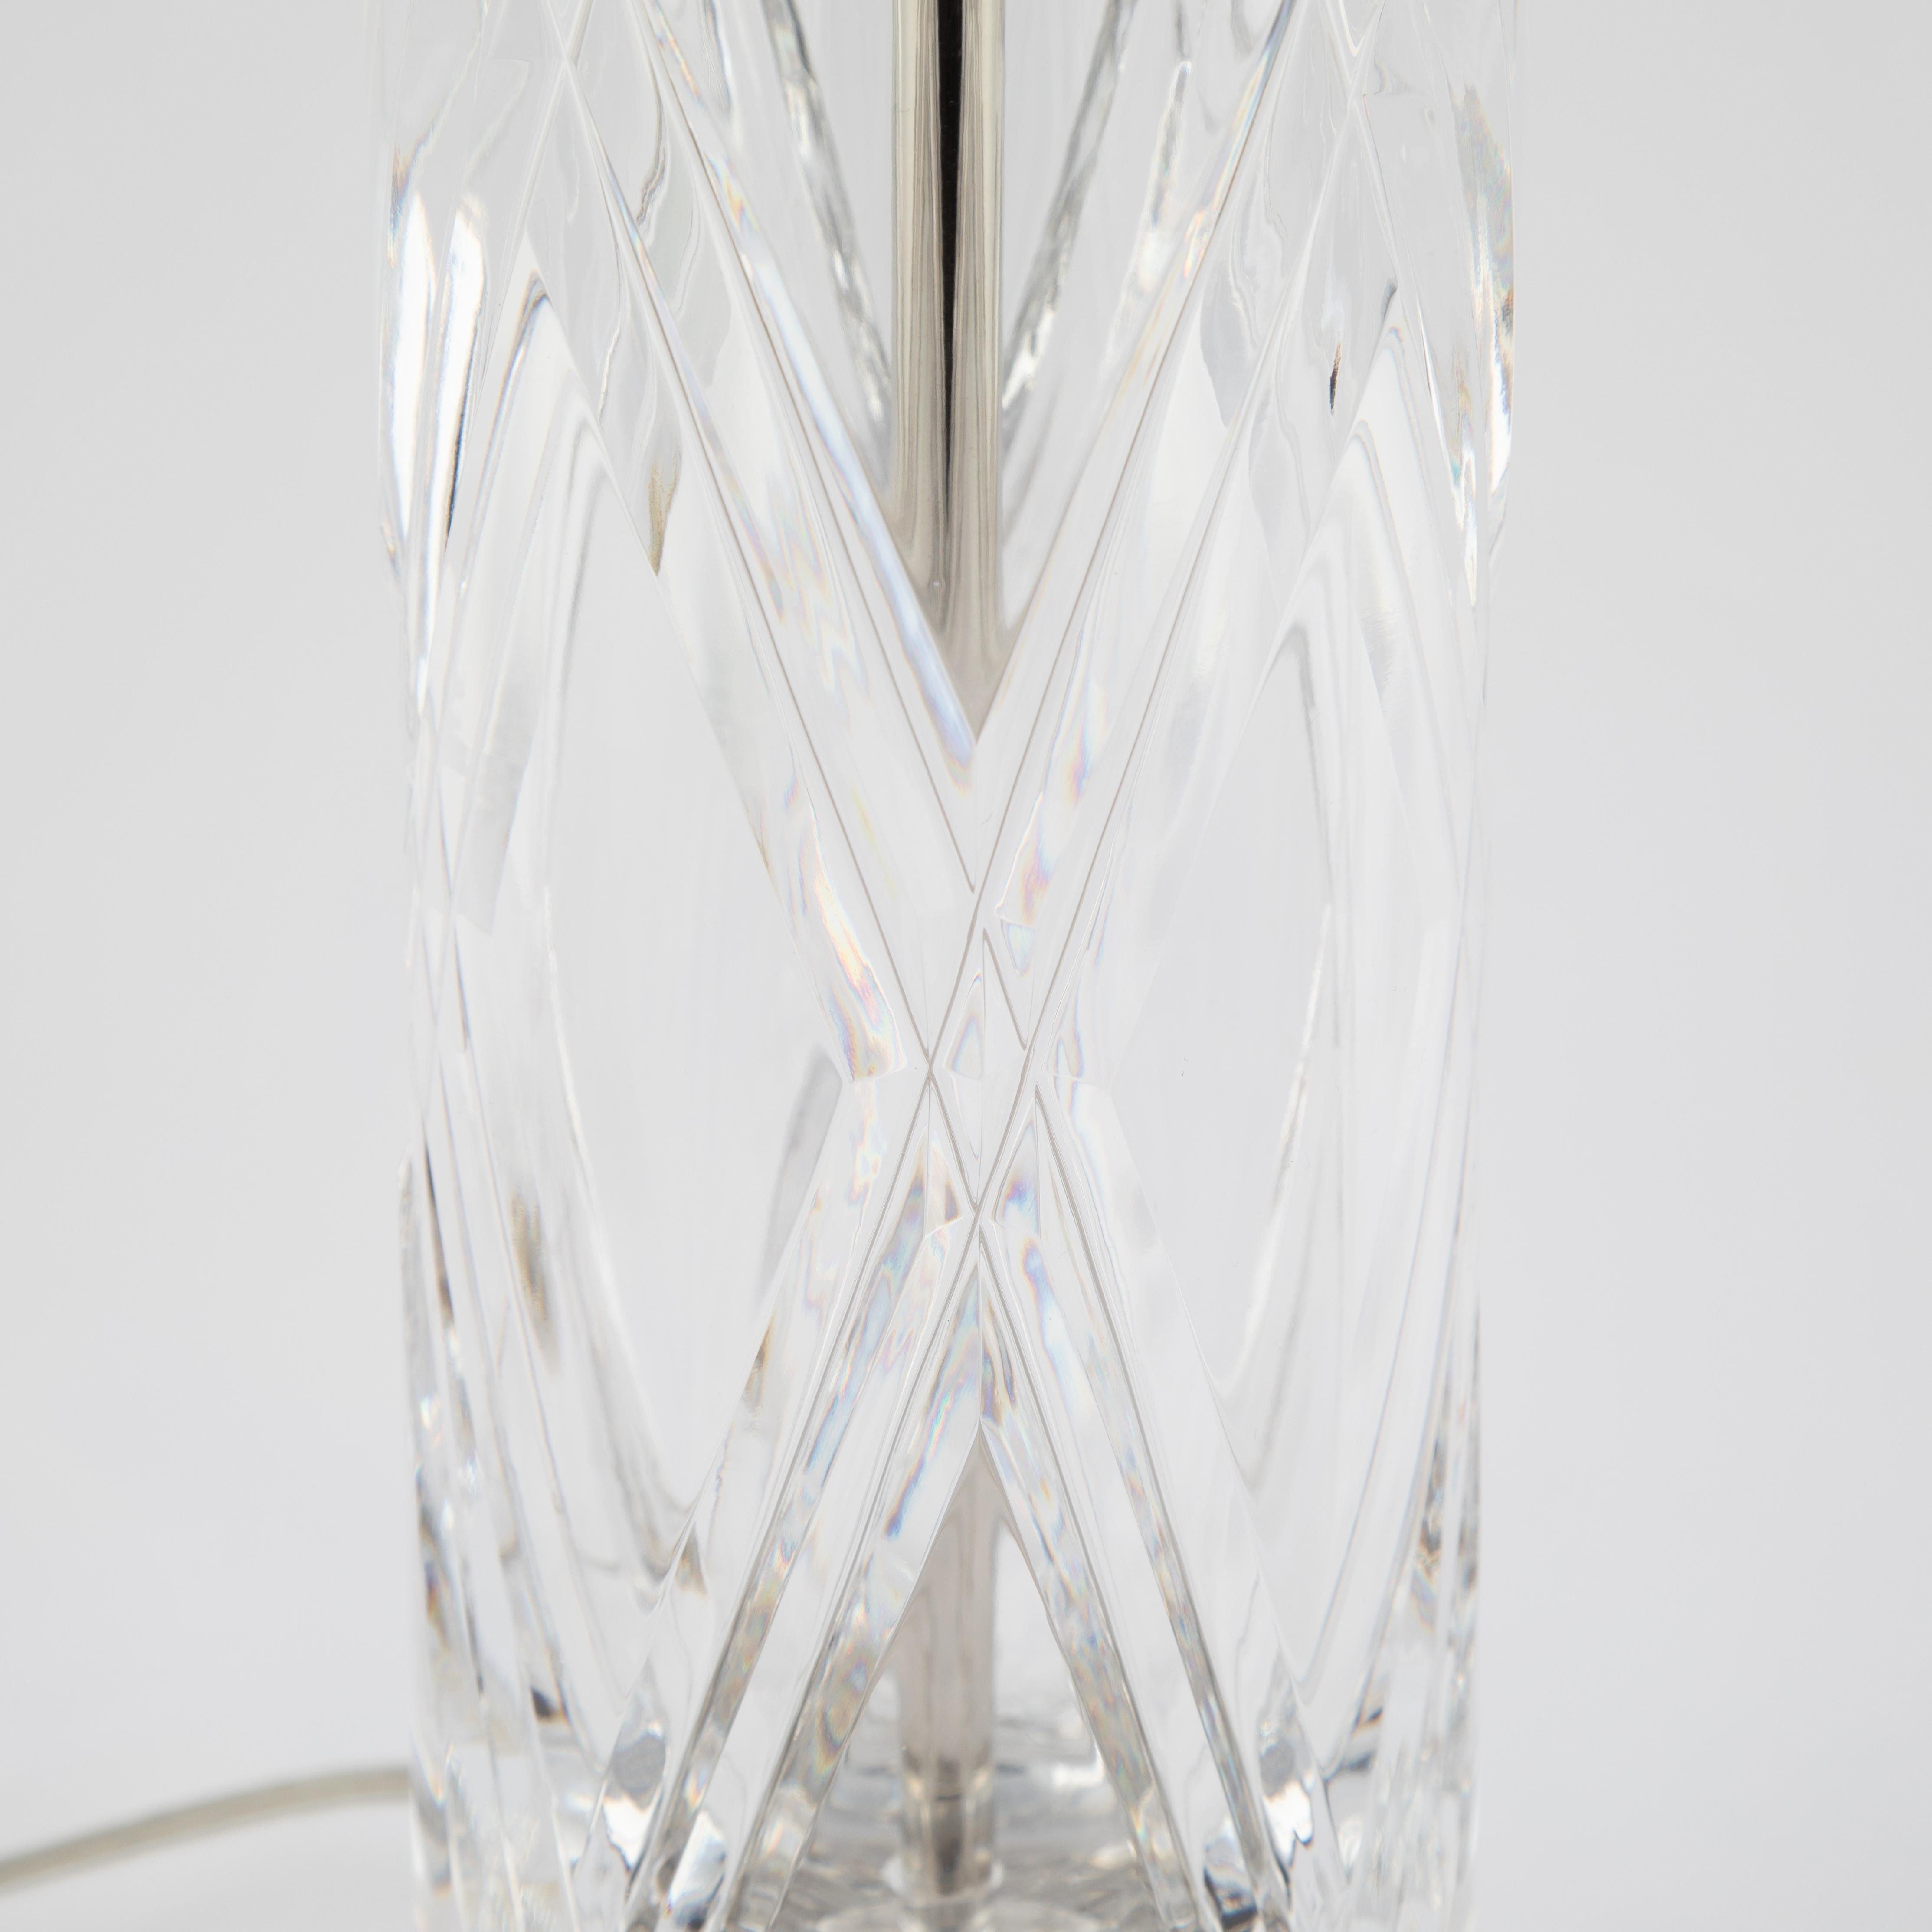 Olle Alberius for Orrefors Handcut Crystal Table Lamps, circa 1970s For Sale 8